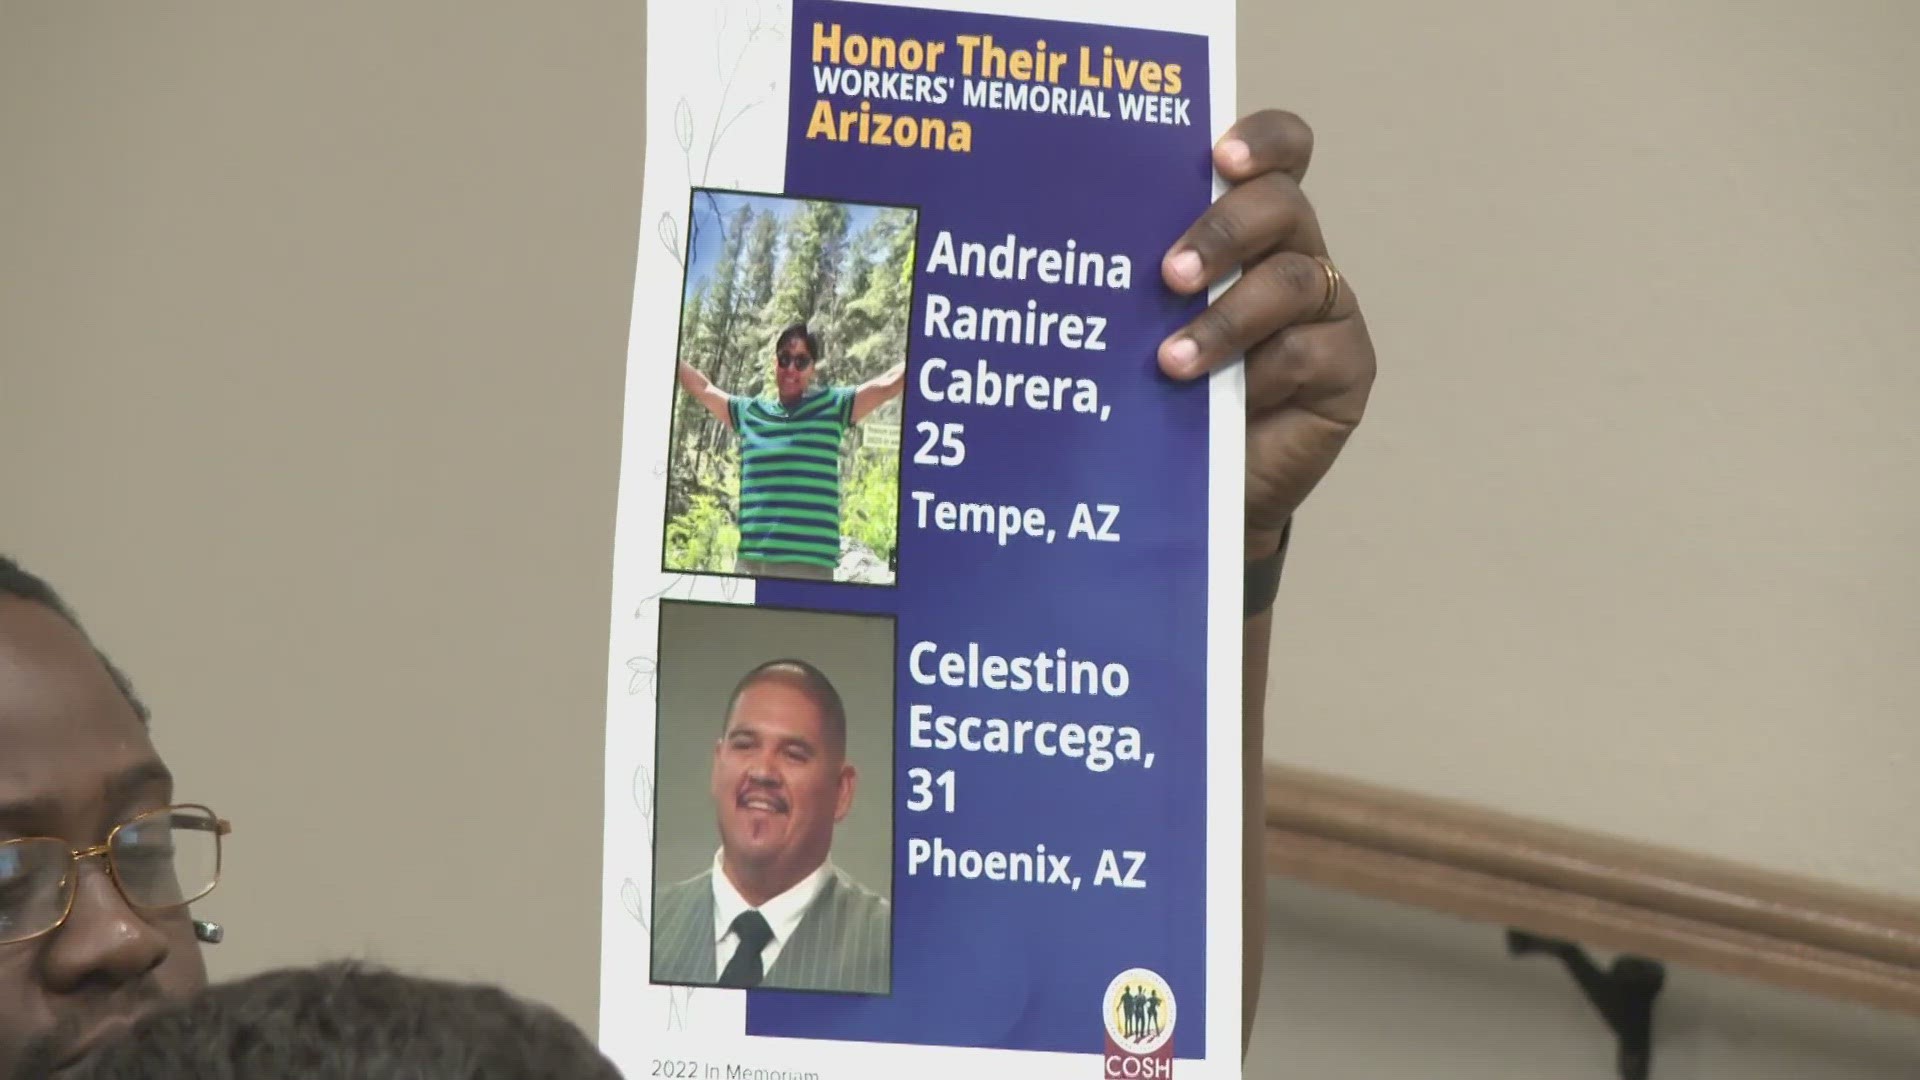 The group works to enforce stronger guidelines to protect workers on the job in Arizona.